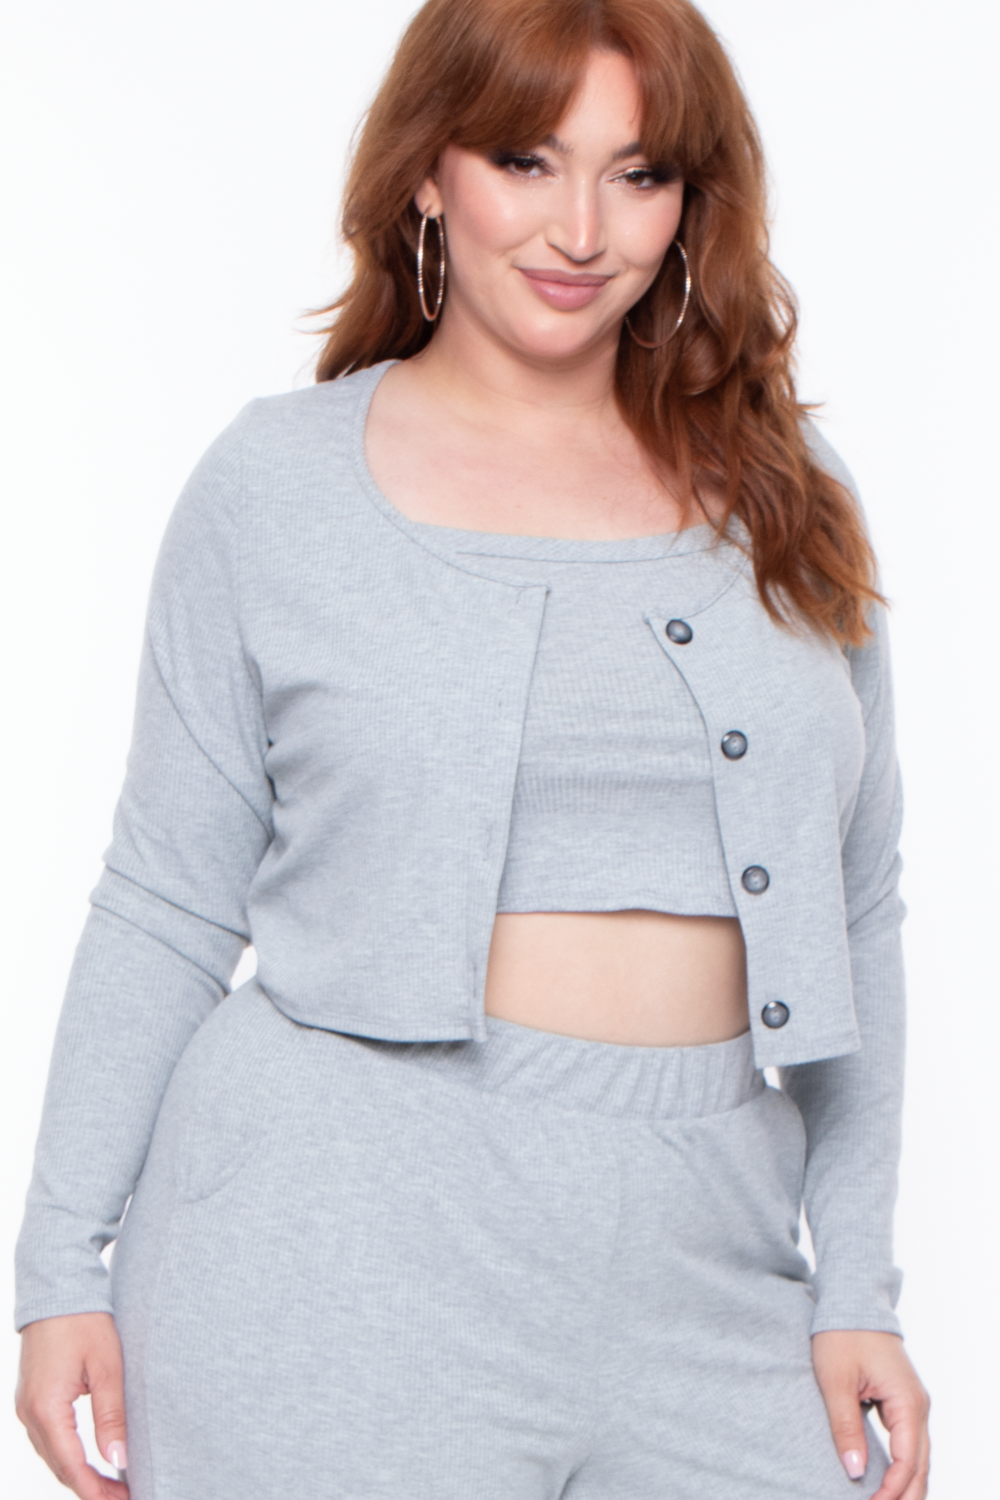 Curvy Sense Tops Plus Size Essential Ribbed Button Front Top - Heather Grey